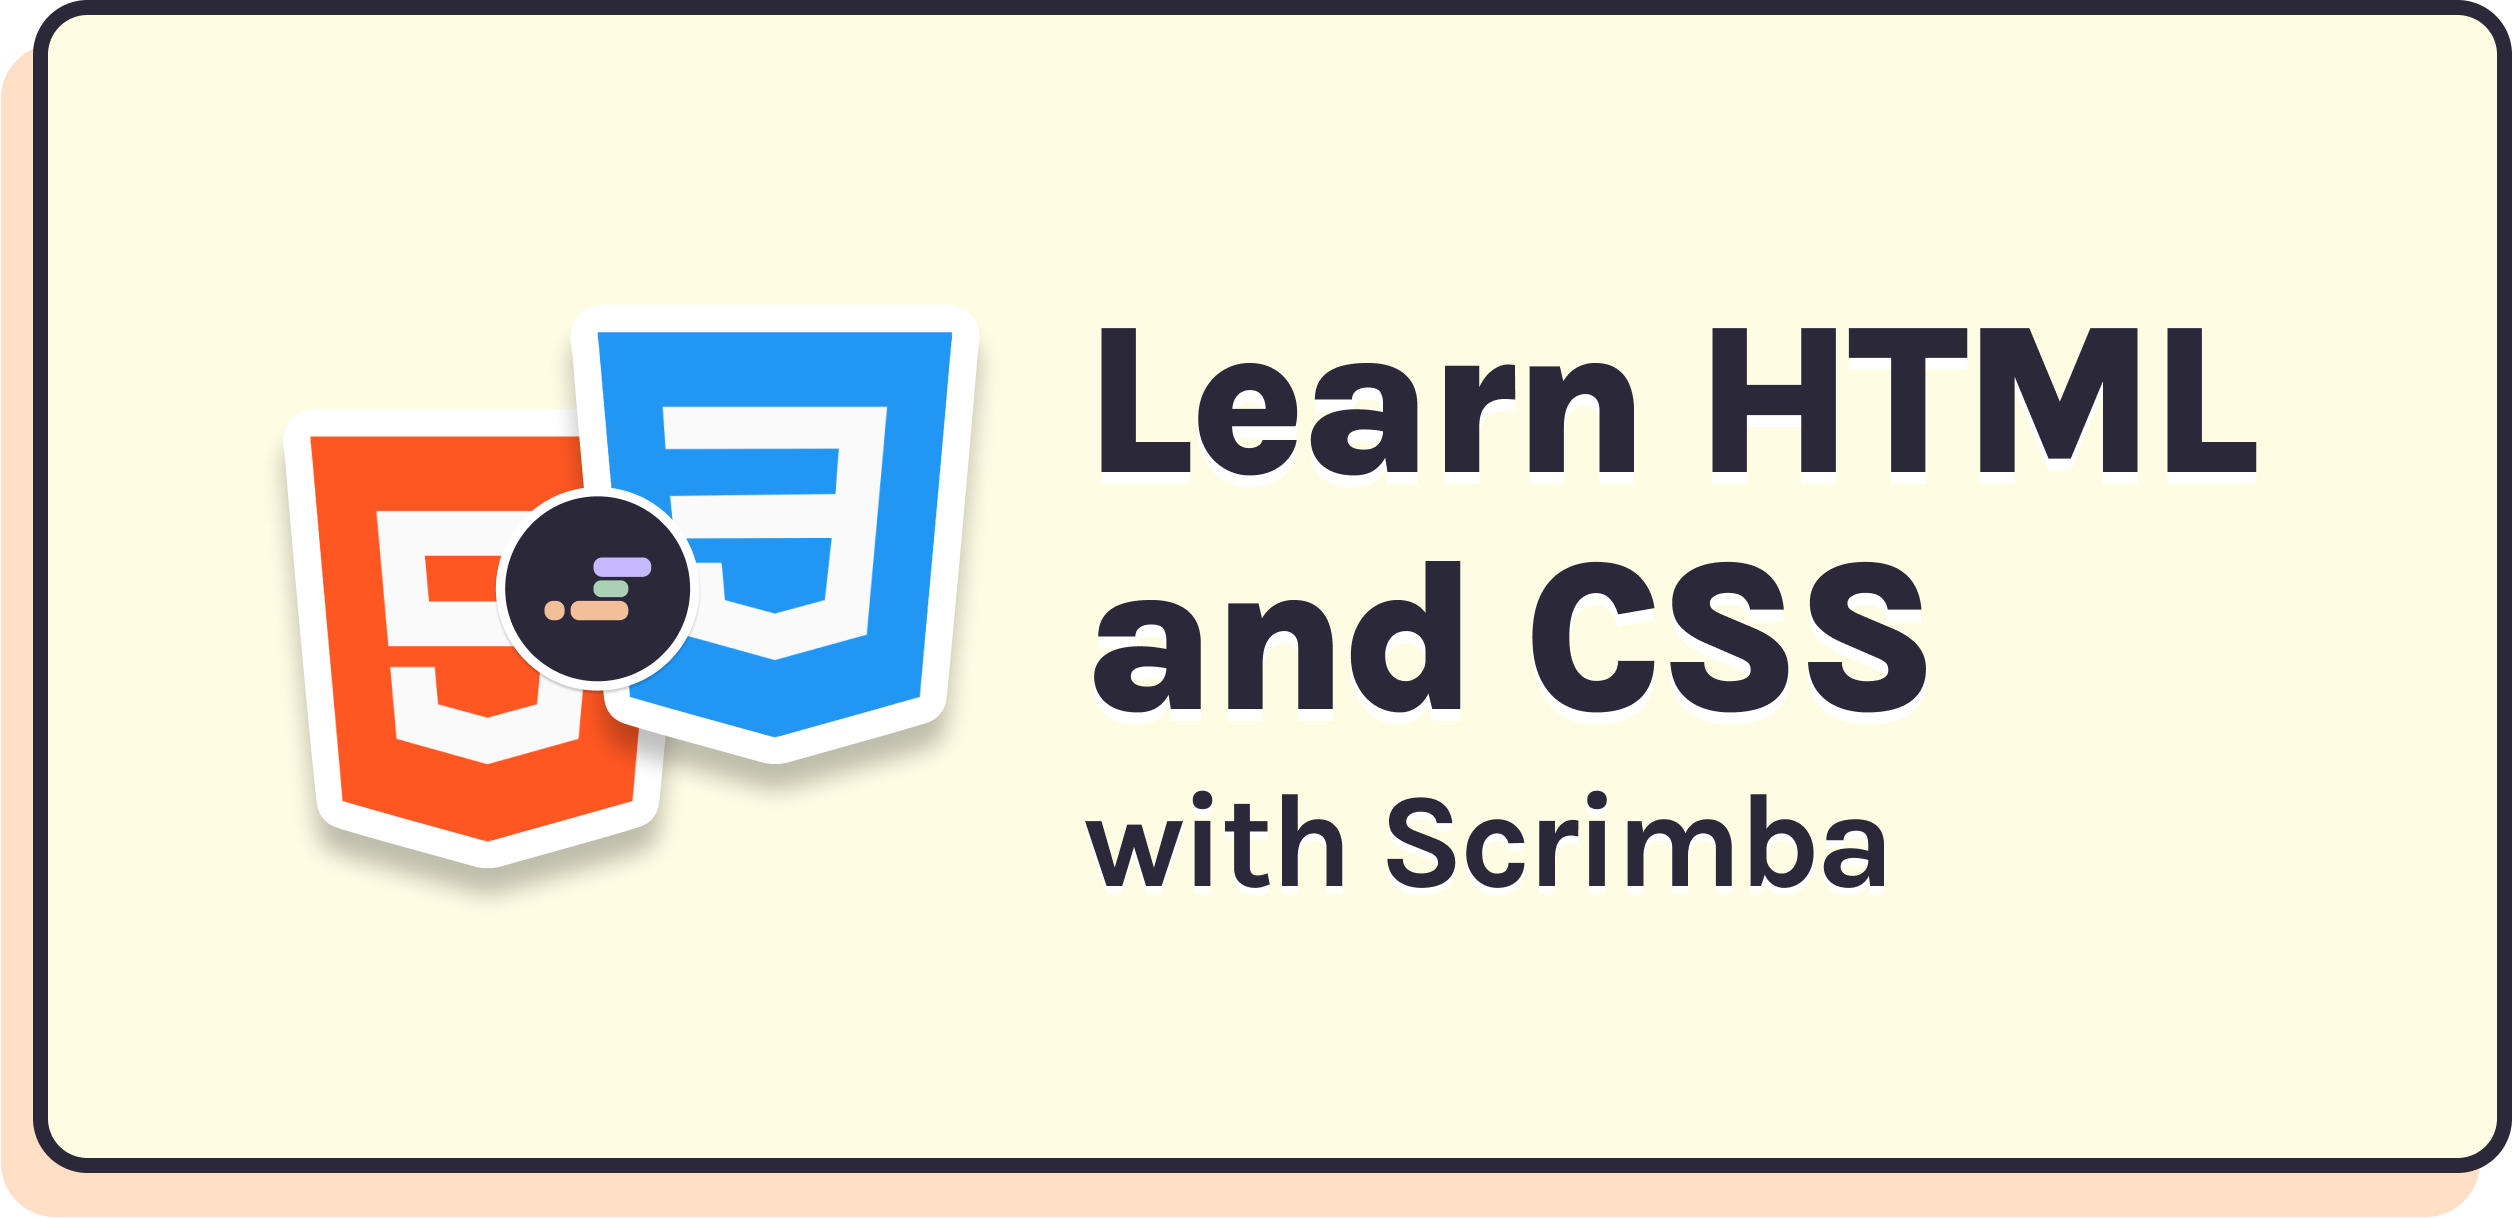 Learn HTML and CSS with Scrimba